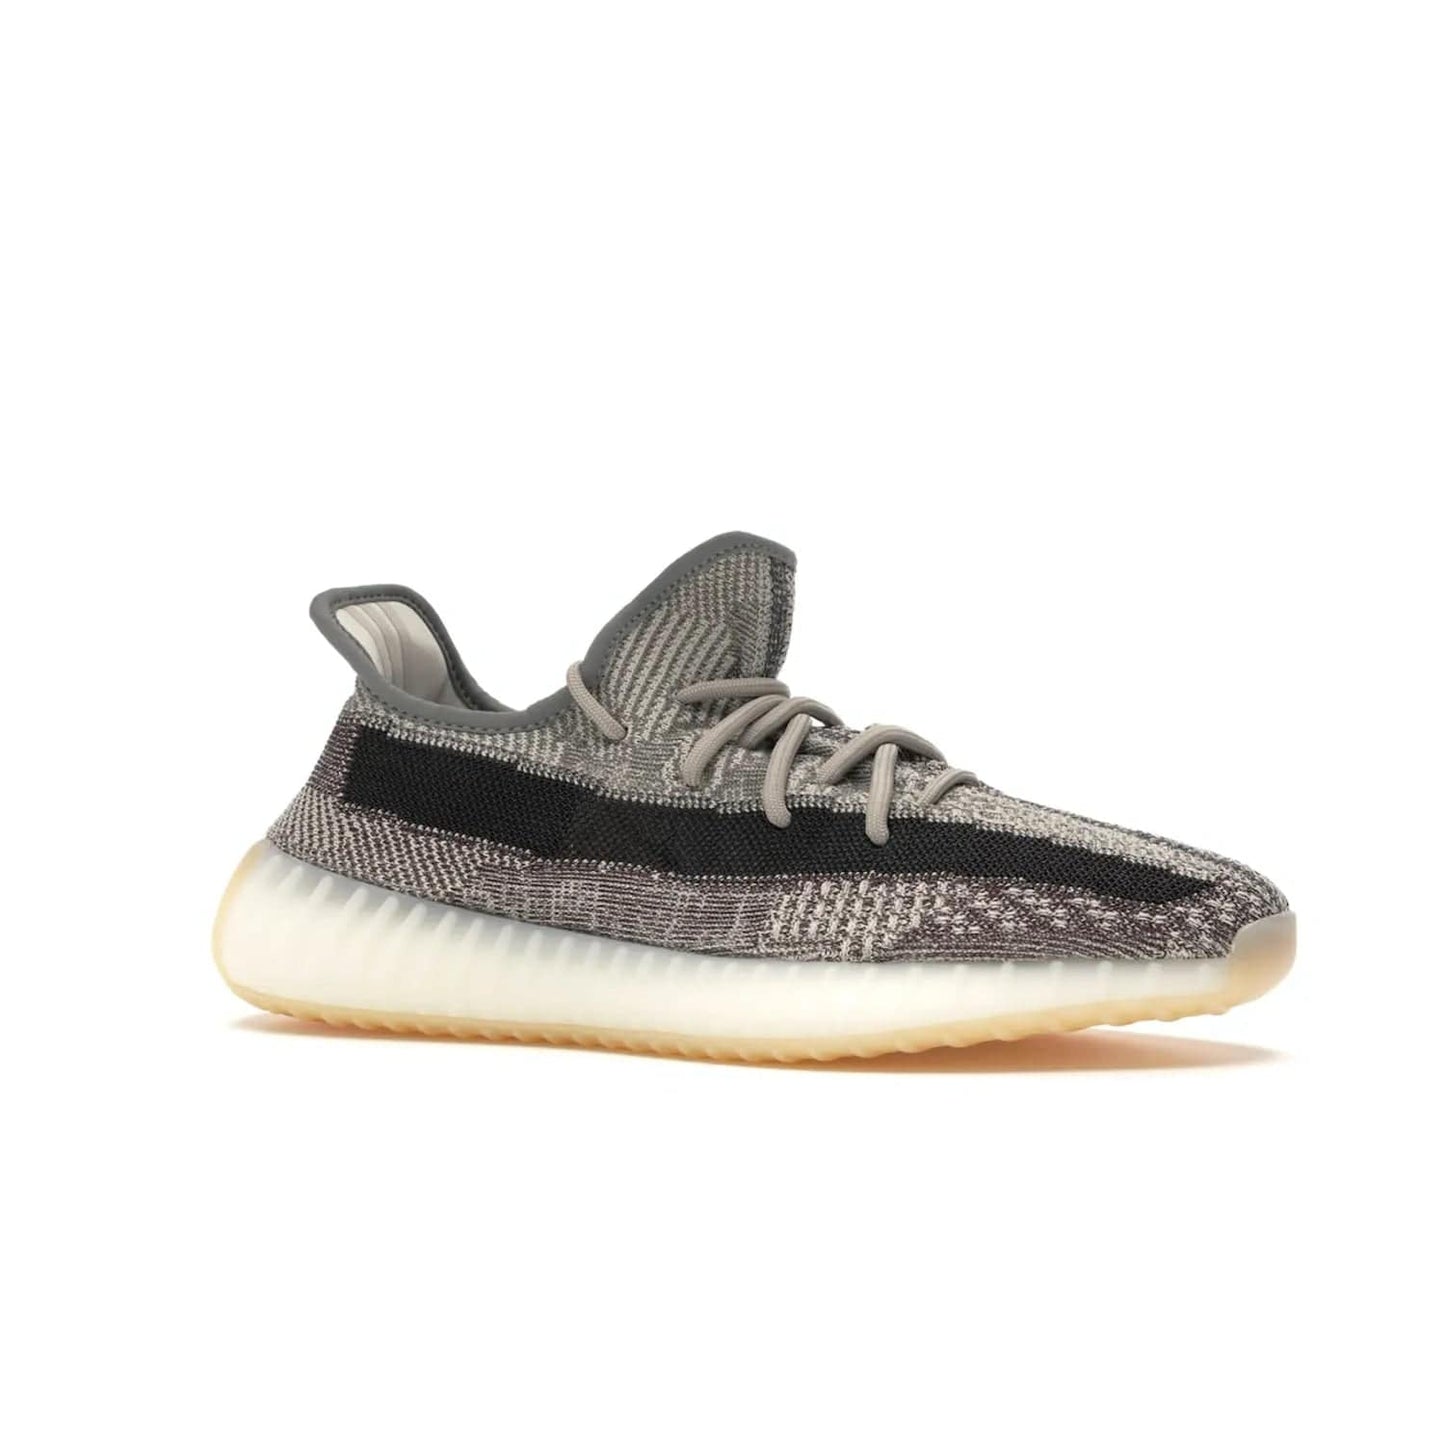 adidas Yeezy Boost 350 V2 Zyon - Image 3 - Only at www.BallersClubKickz.com - Step up your style game with the adidas Yeezy Boost 350 V2 Zyon. This sleek sneaker features a Primeknit upper, dark side stripe, translucent Boost sole, and creamy white interior providing style and comfort. Get them now!